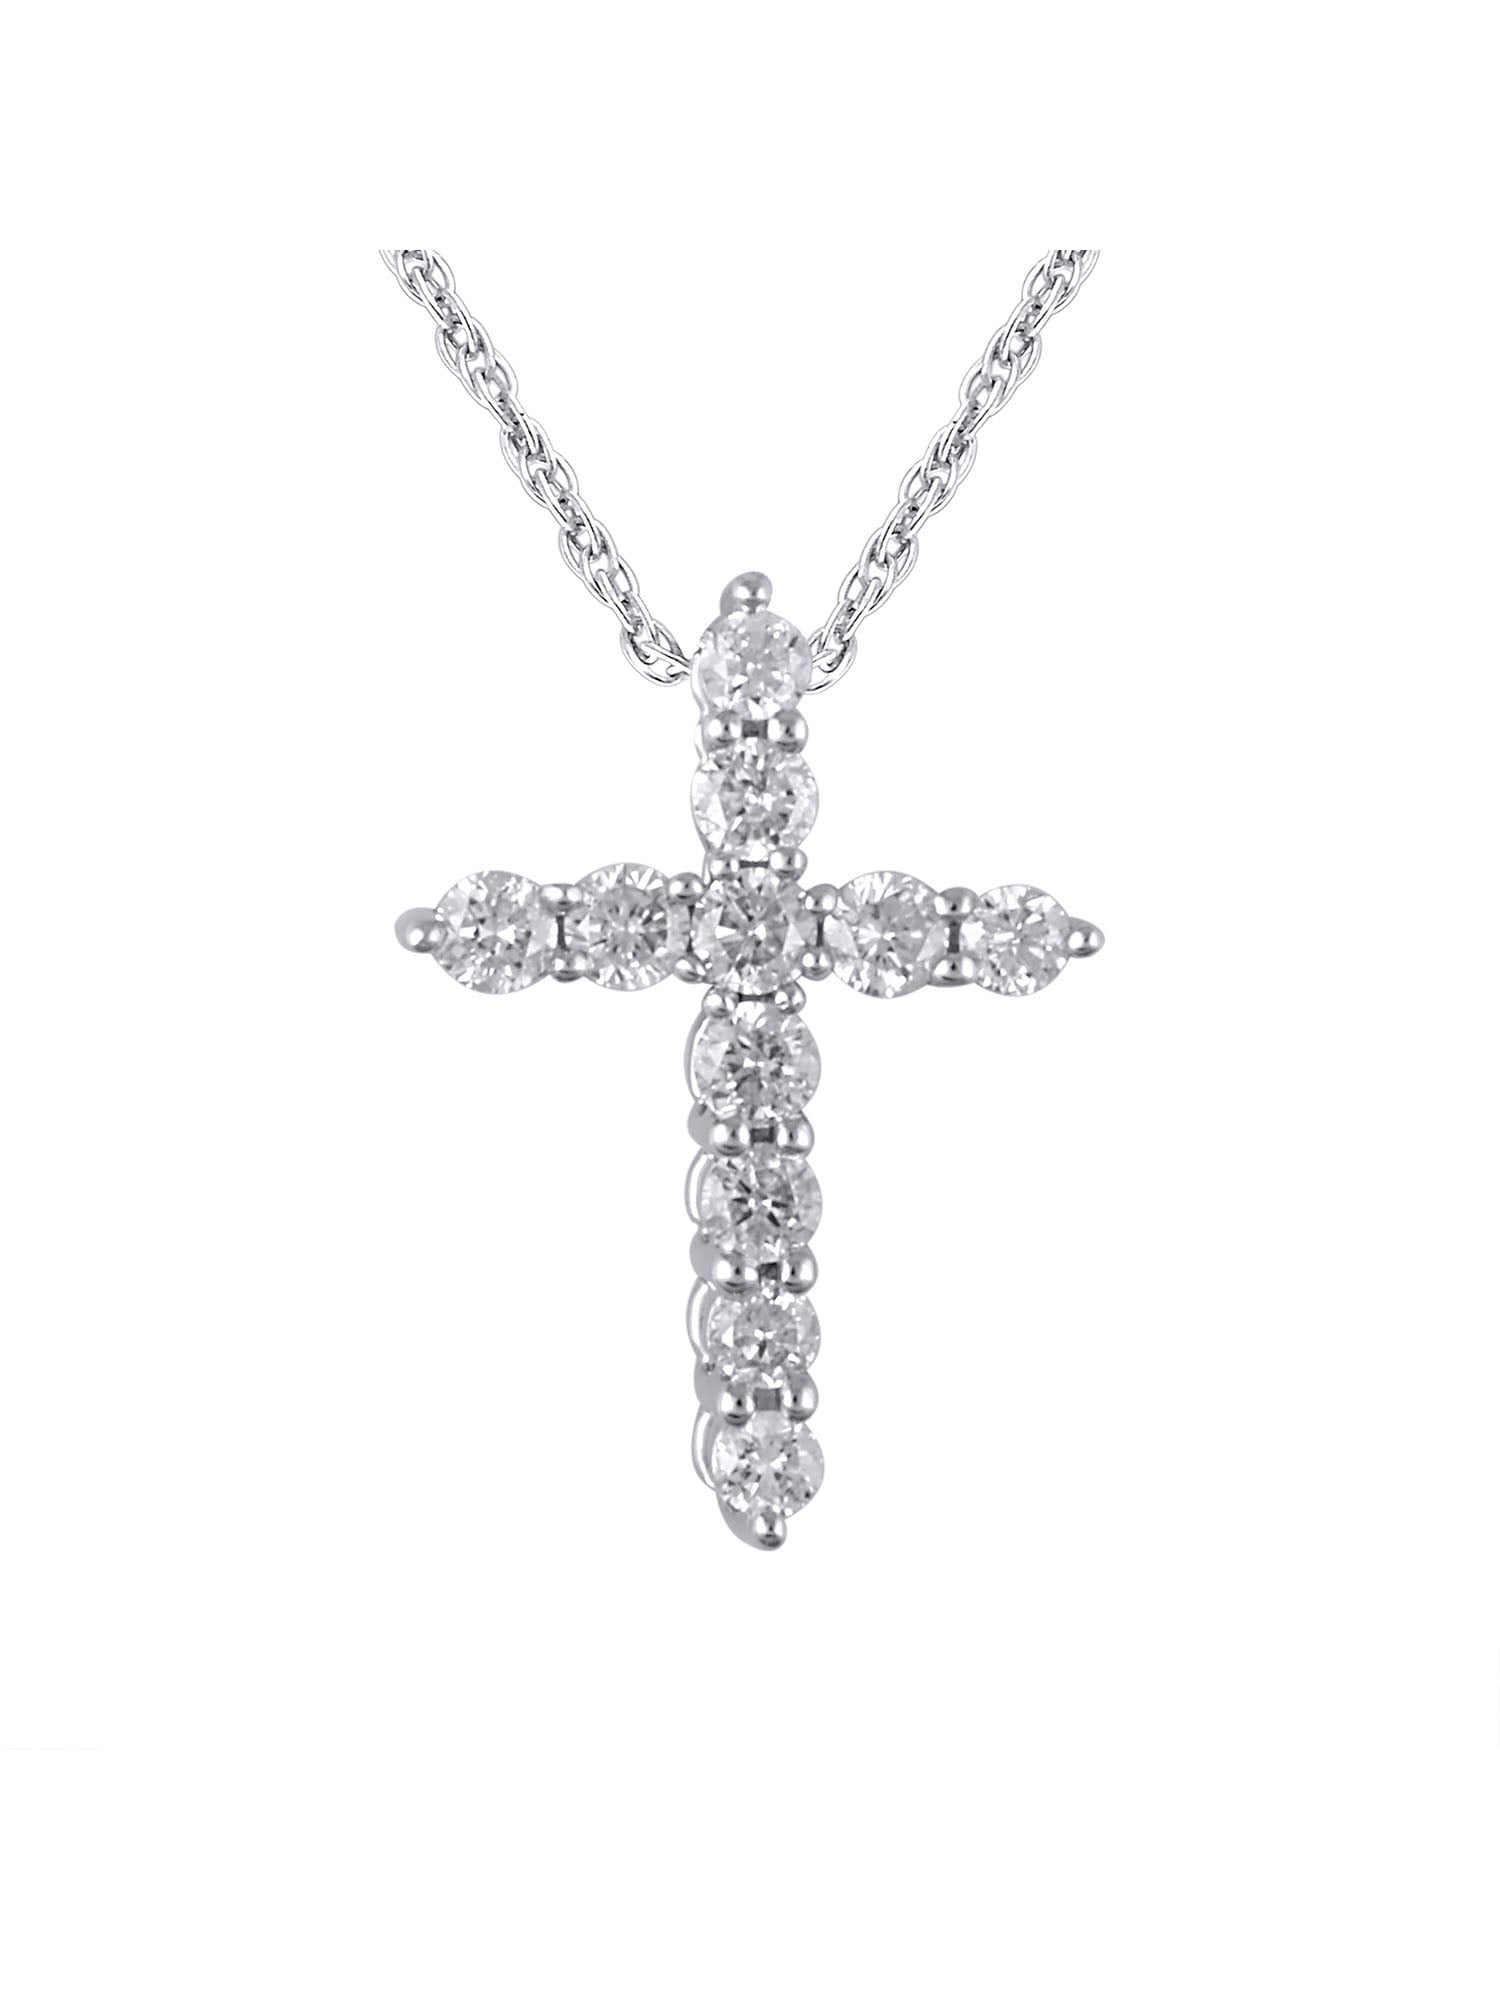 14K White Gold Classic Diamond Cross Pendant Necklace with 18